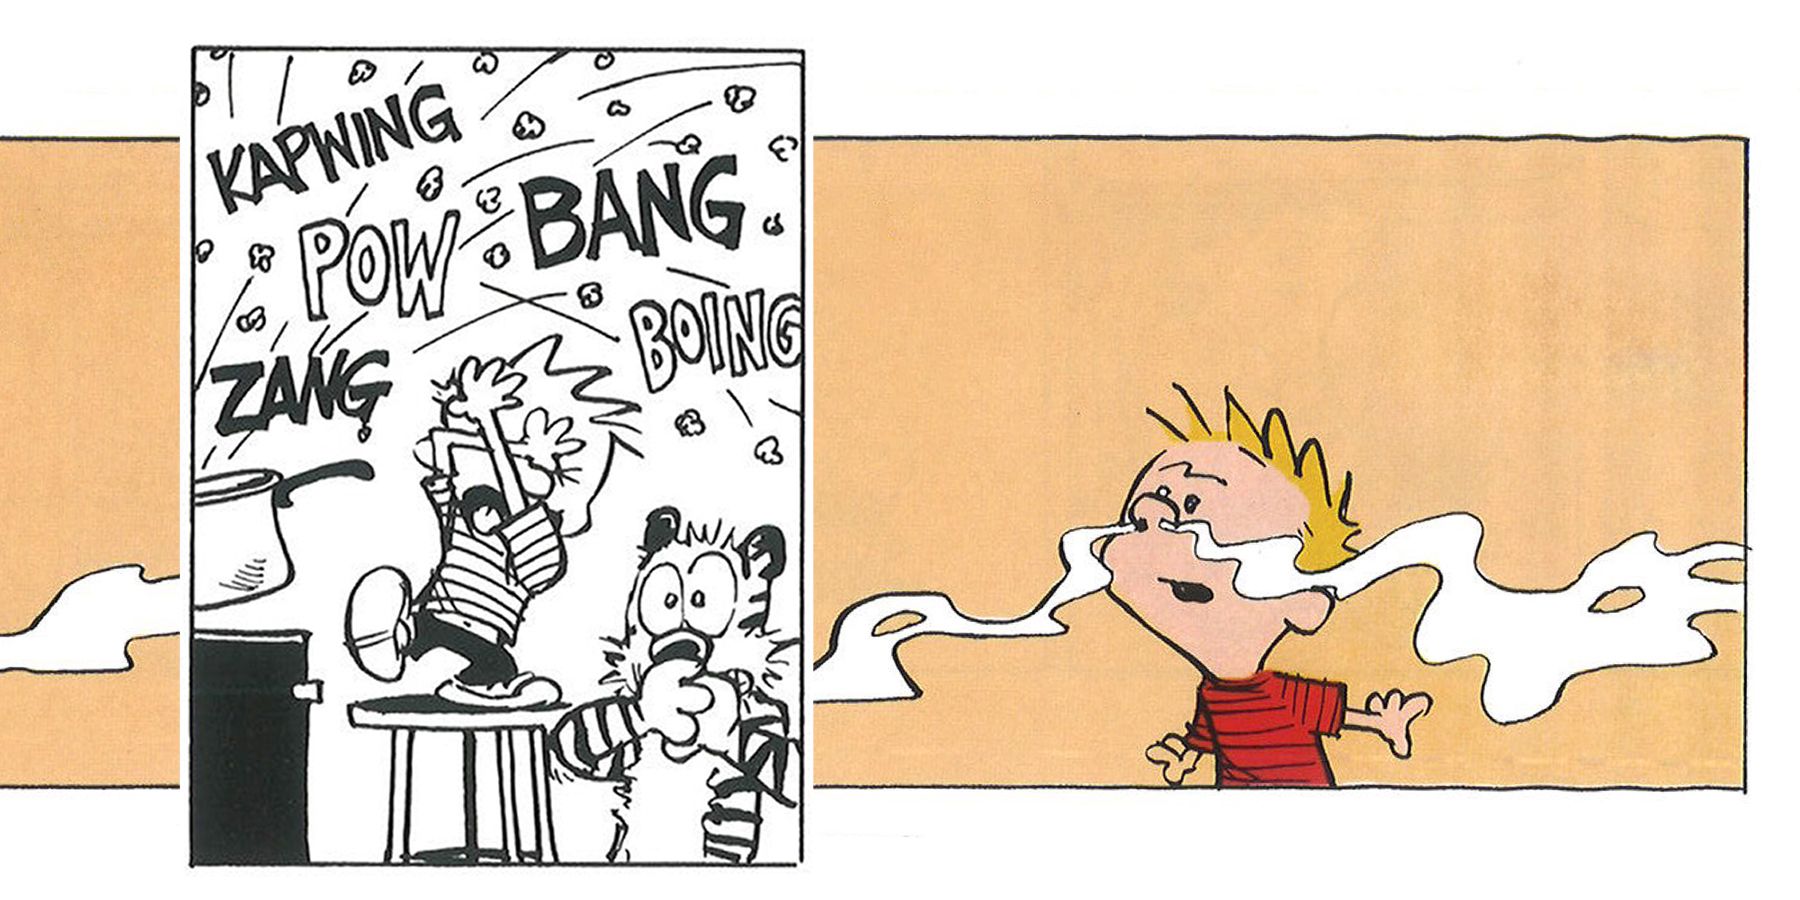 Panels from Calvin and Hobbes: popcorn on the stove, superimposed over a image of Calvin sniffing a scent in the air.